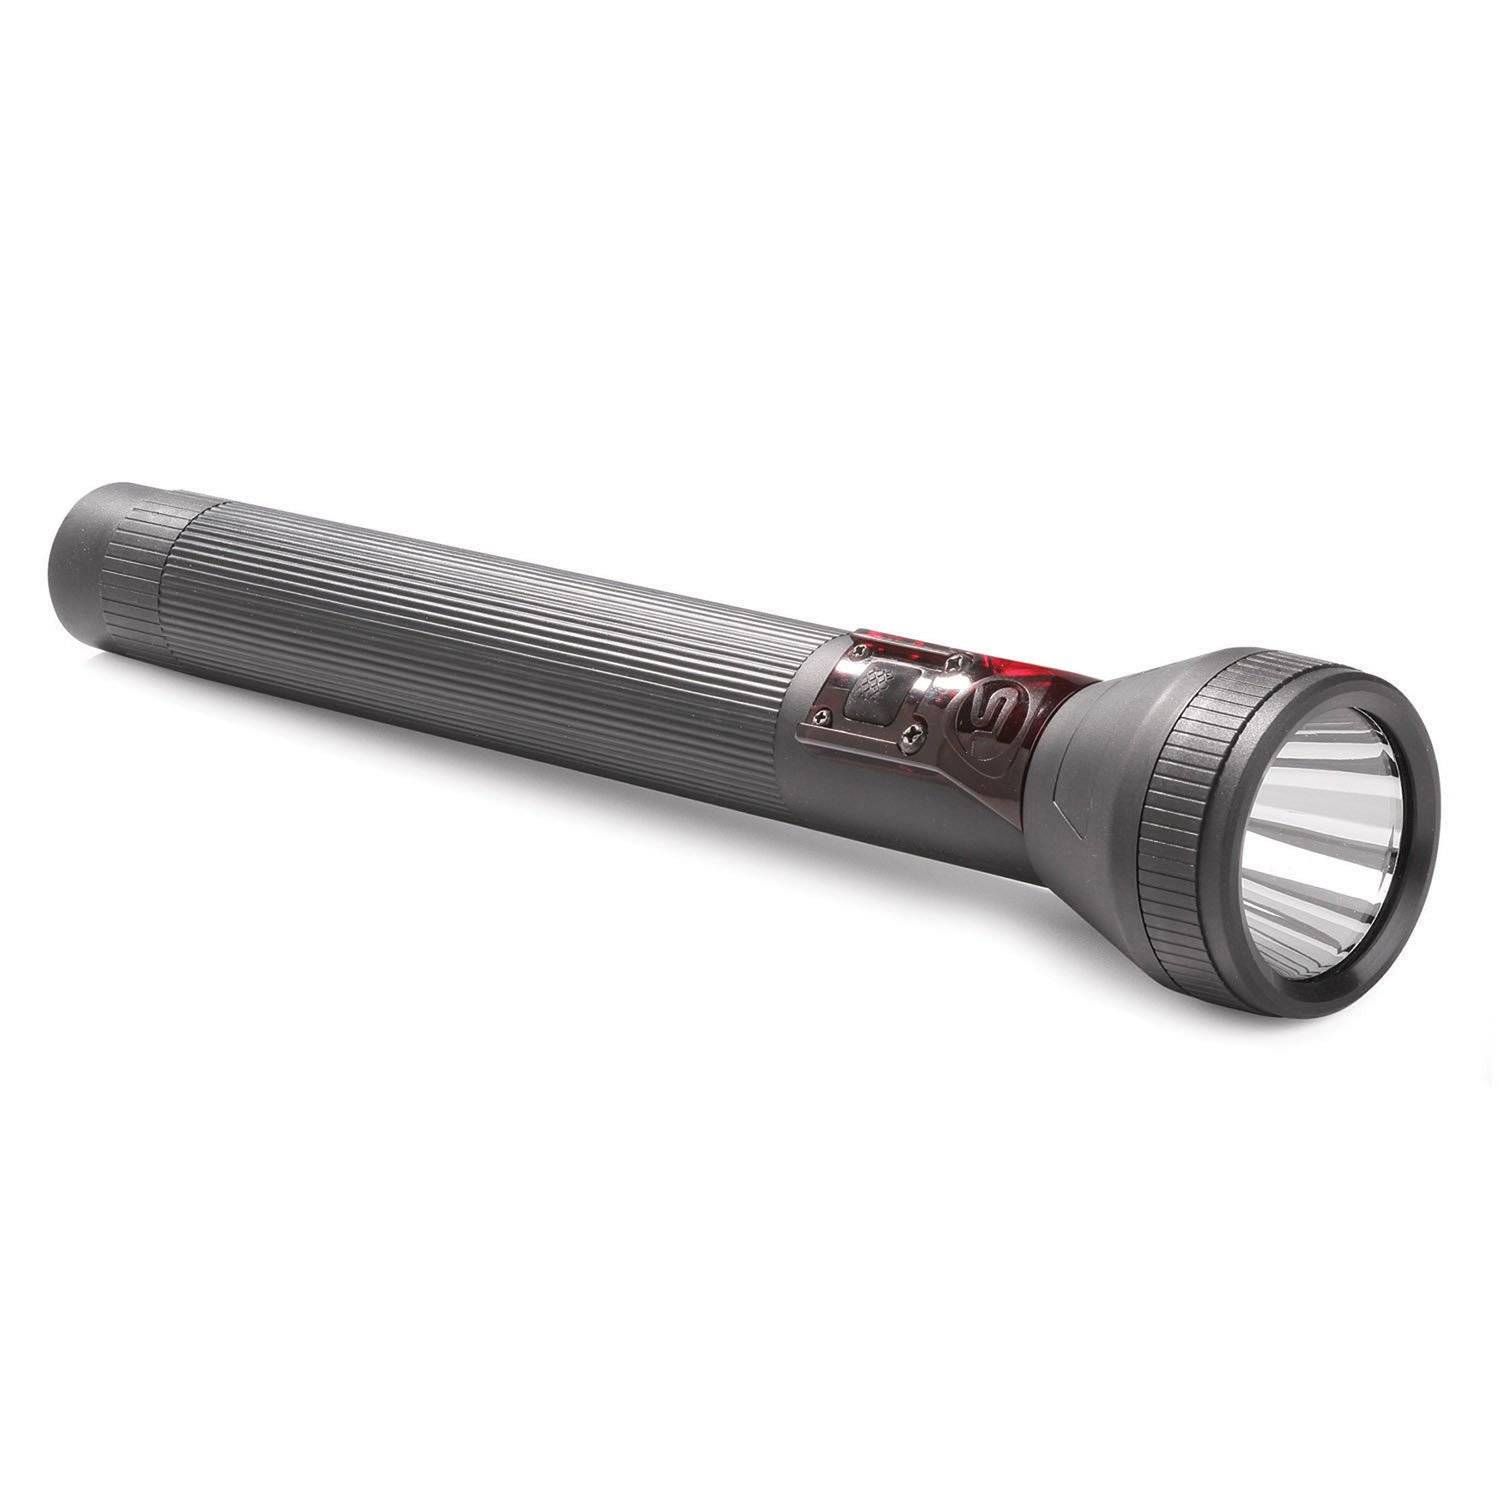 Streamlight SL 20L Aluminum Rechargeable Duty Light with Cha